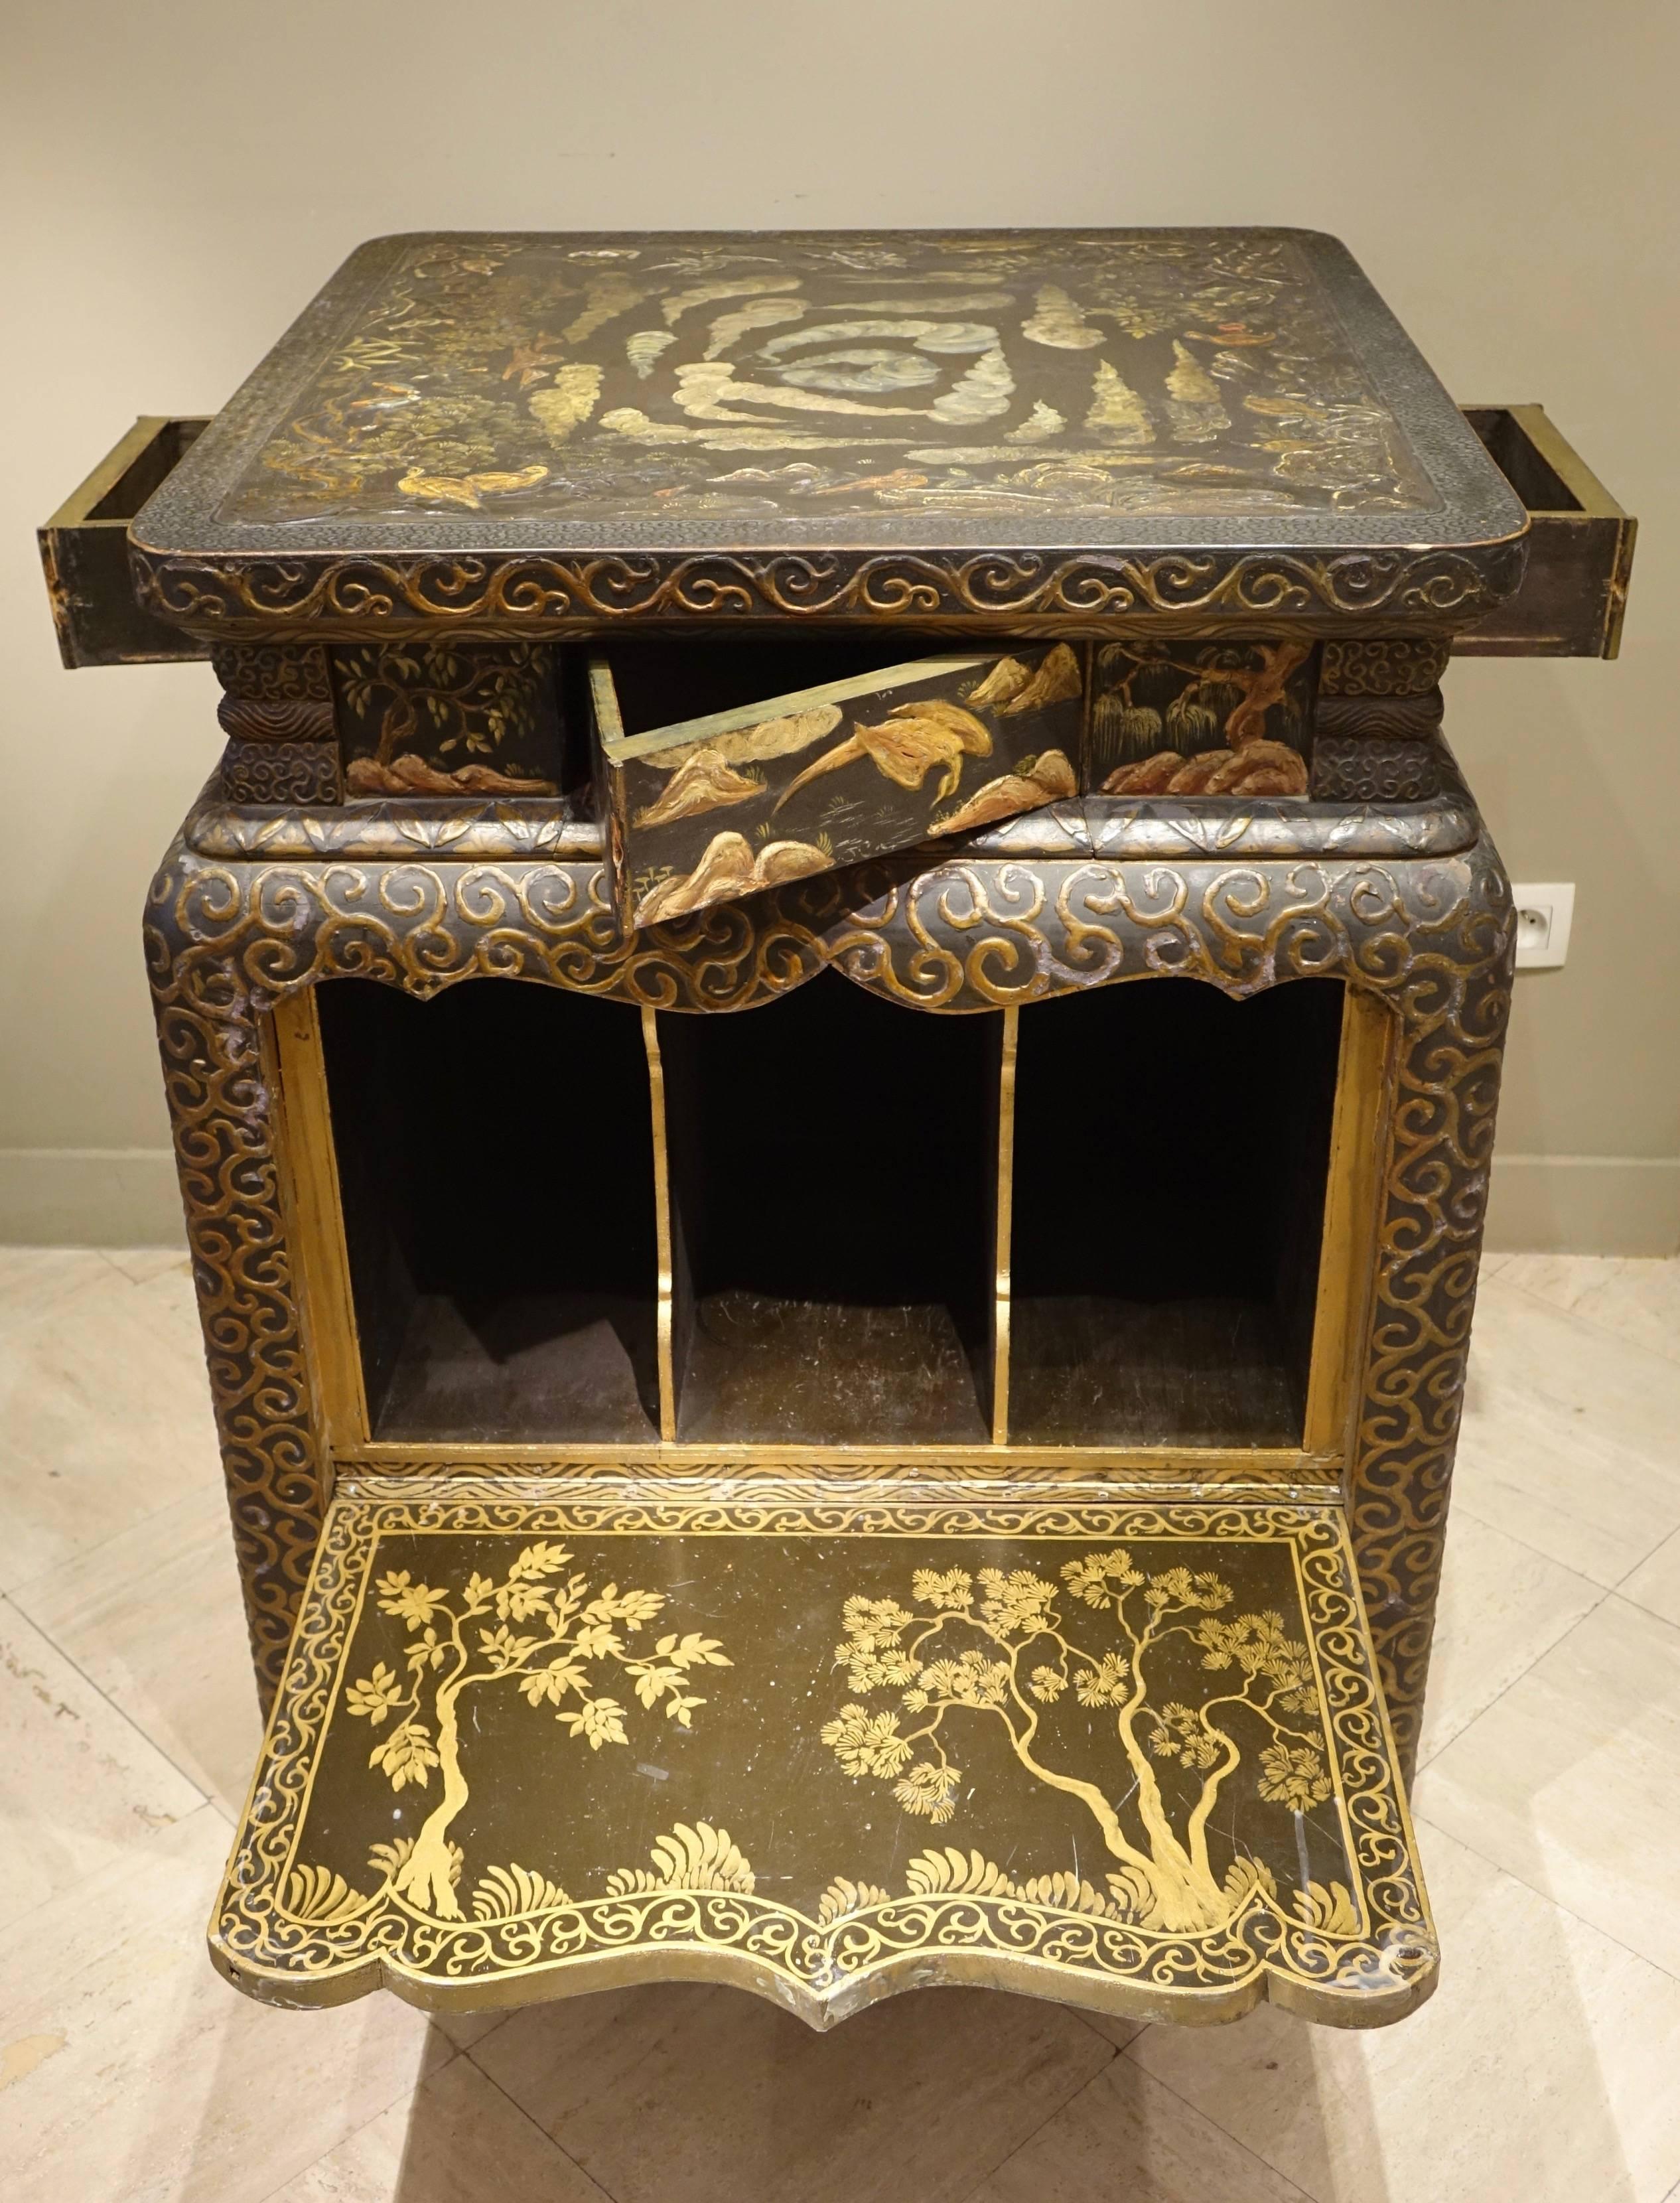 Chinese Export Unusual Chinese Lacquer Storage Table for Prints, circa 1920